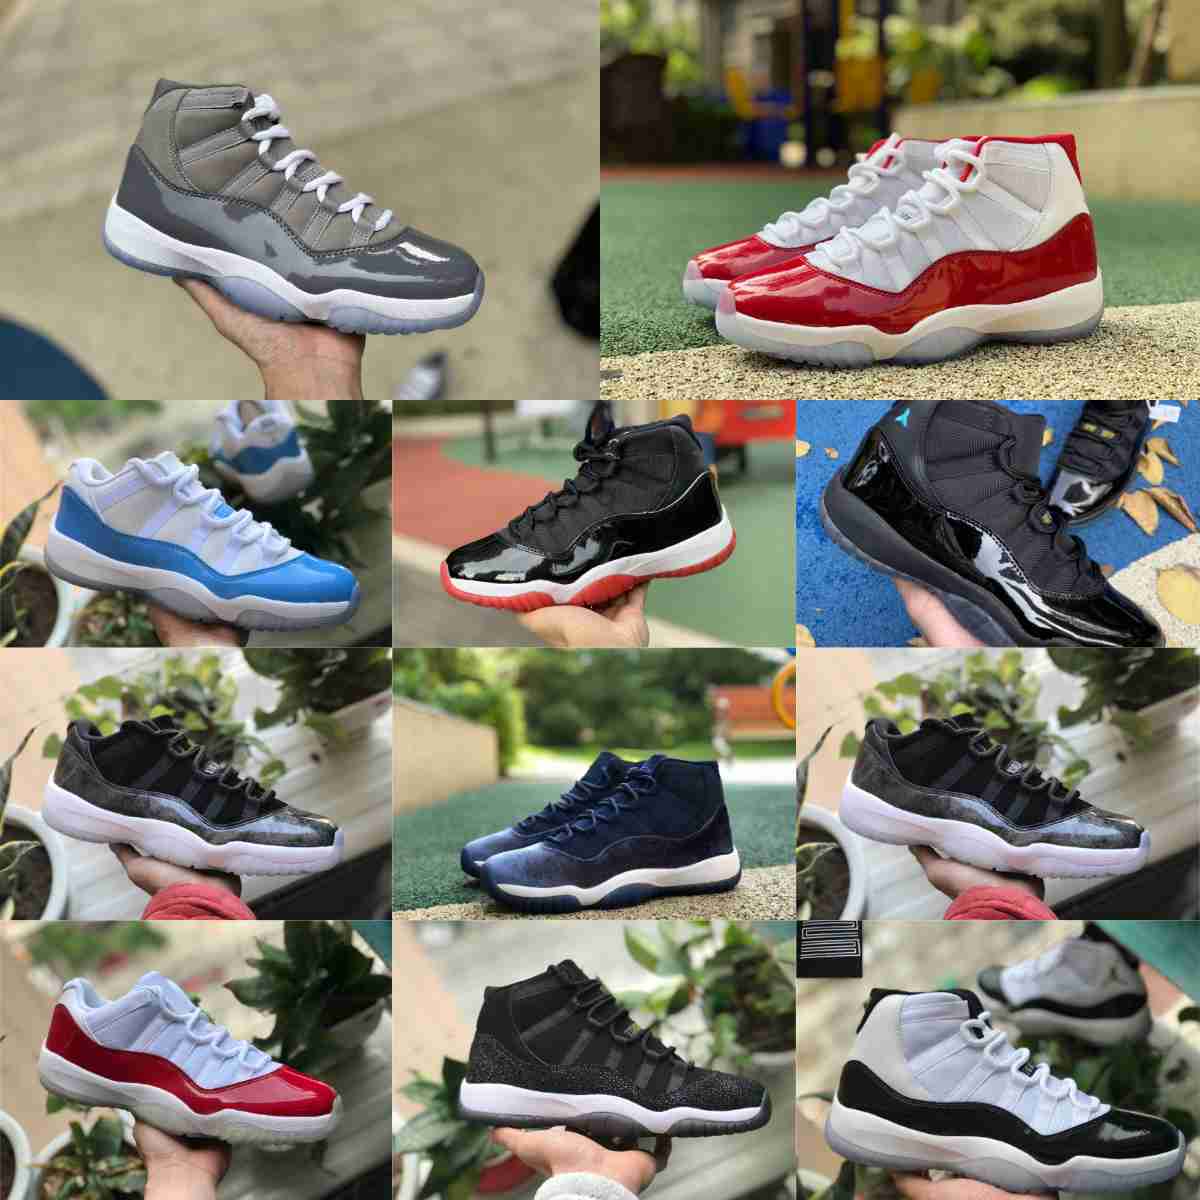 

Jumpman Cherry 11 11s High Mens Basketball Shoes Trainer Jubilee COOL GREY Midnight Navy Concord 45 Low Columbia Playoffs Bred Space Jam Gamma Blue Women Sneakers S9, Please contact us